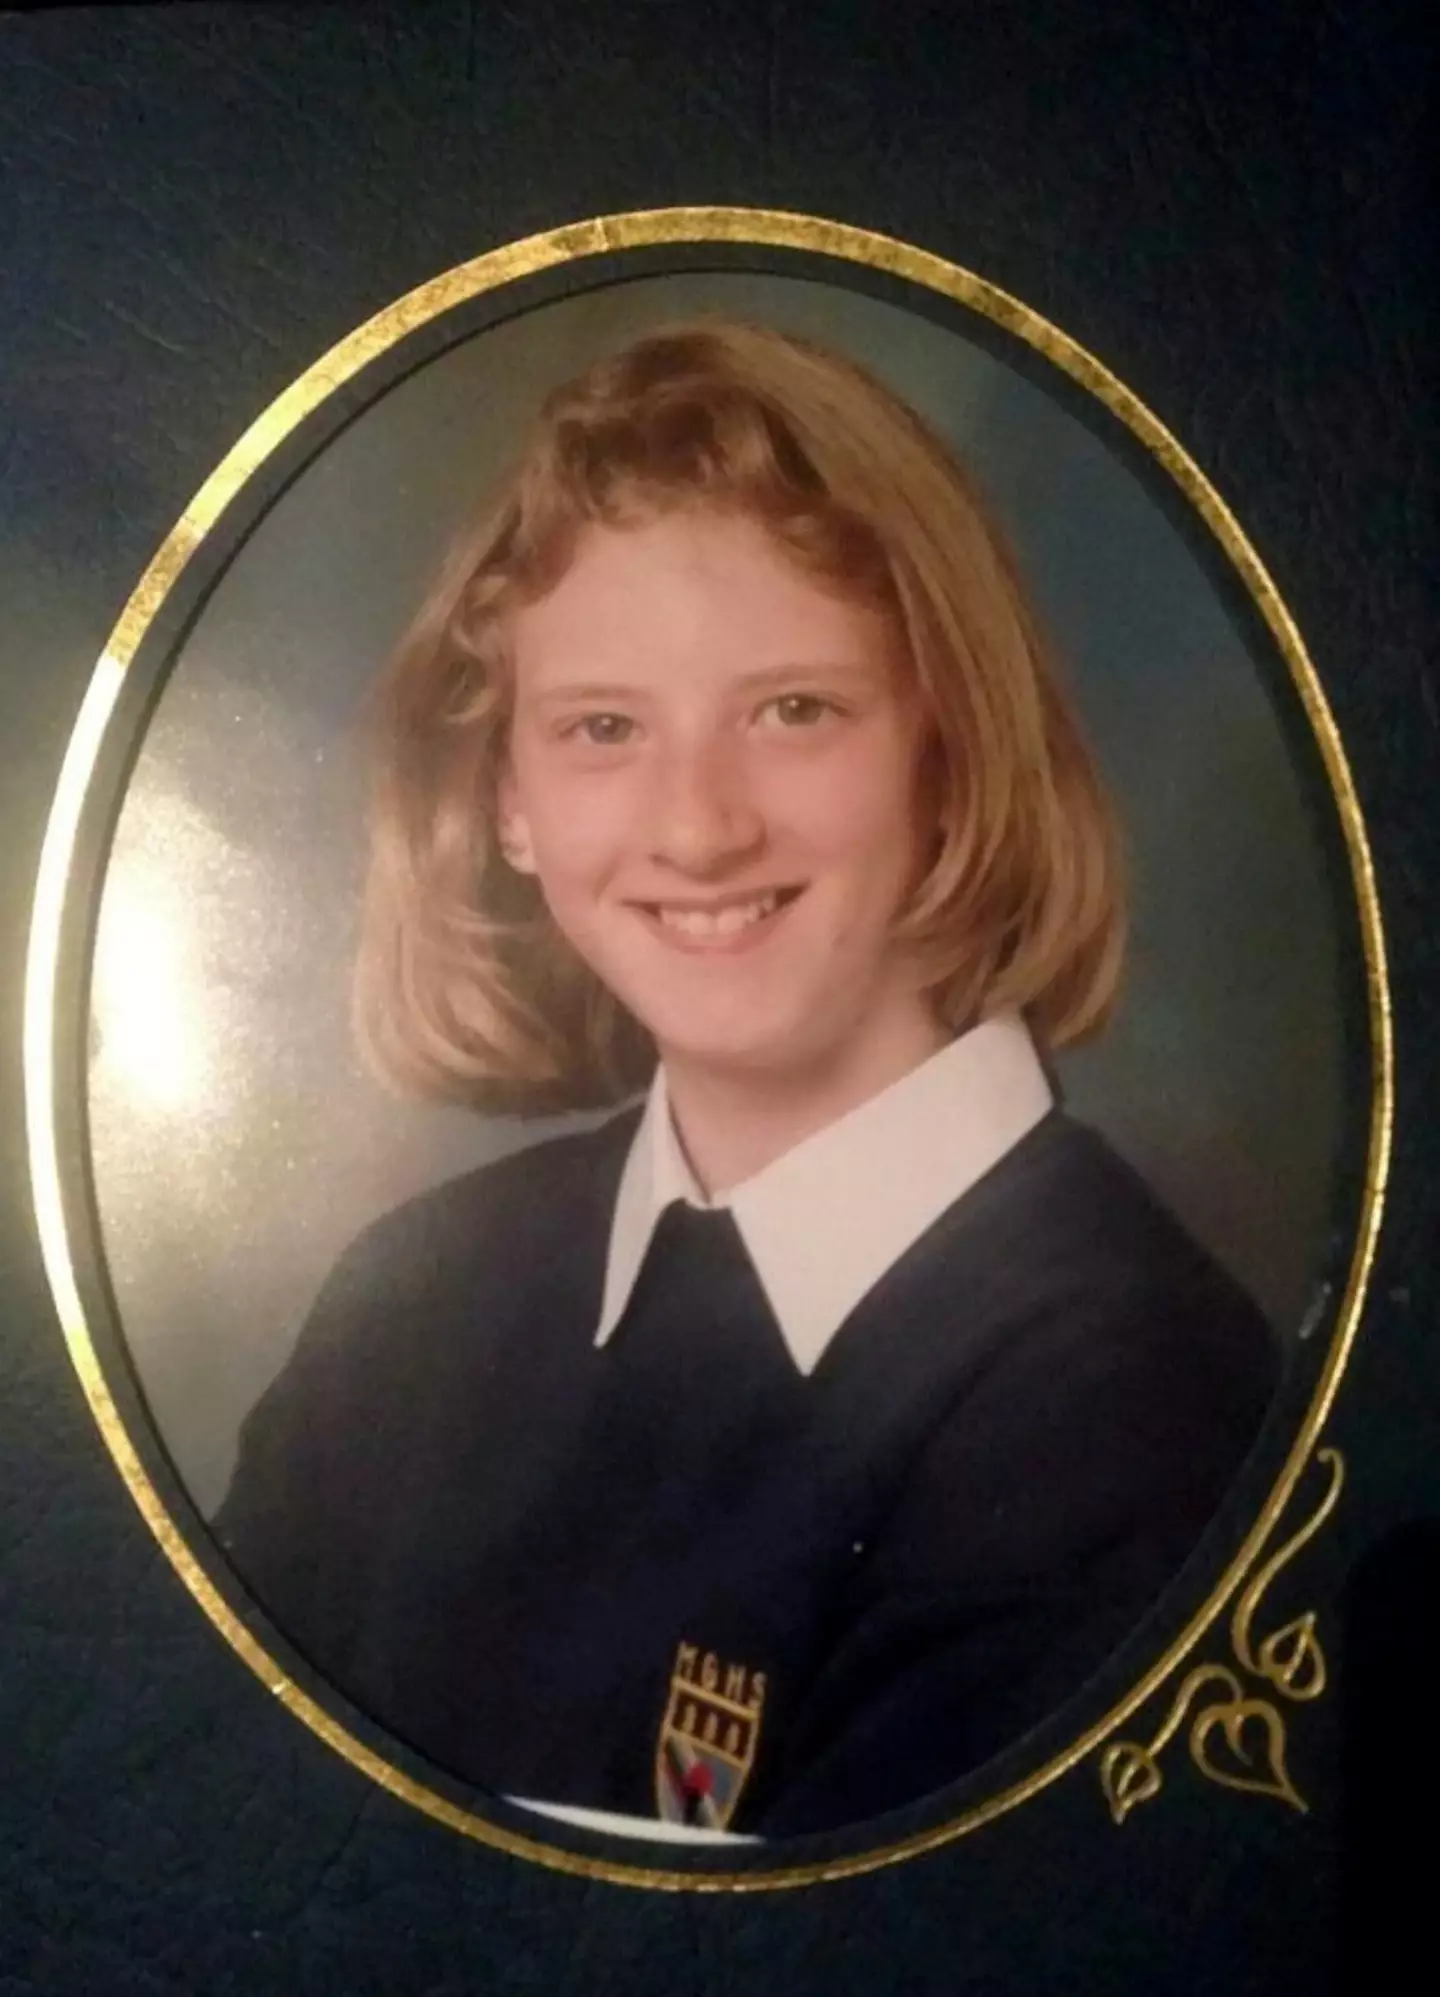 Cally was bullied at school before she became the bully.